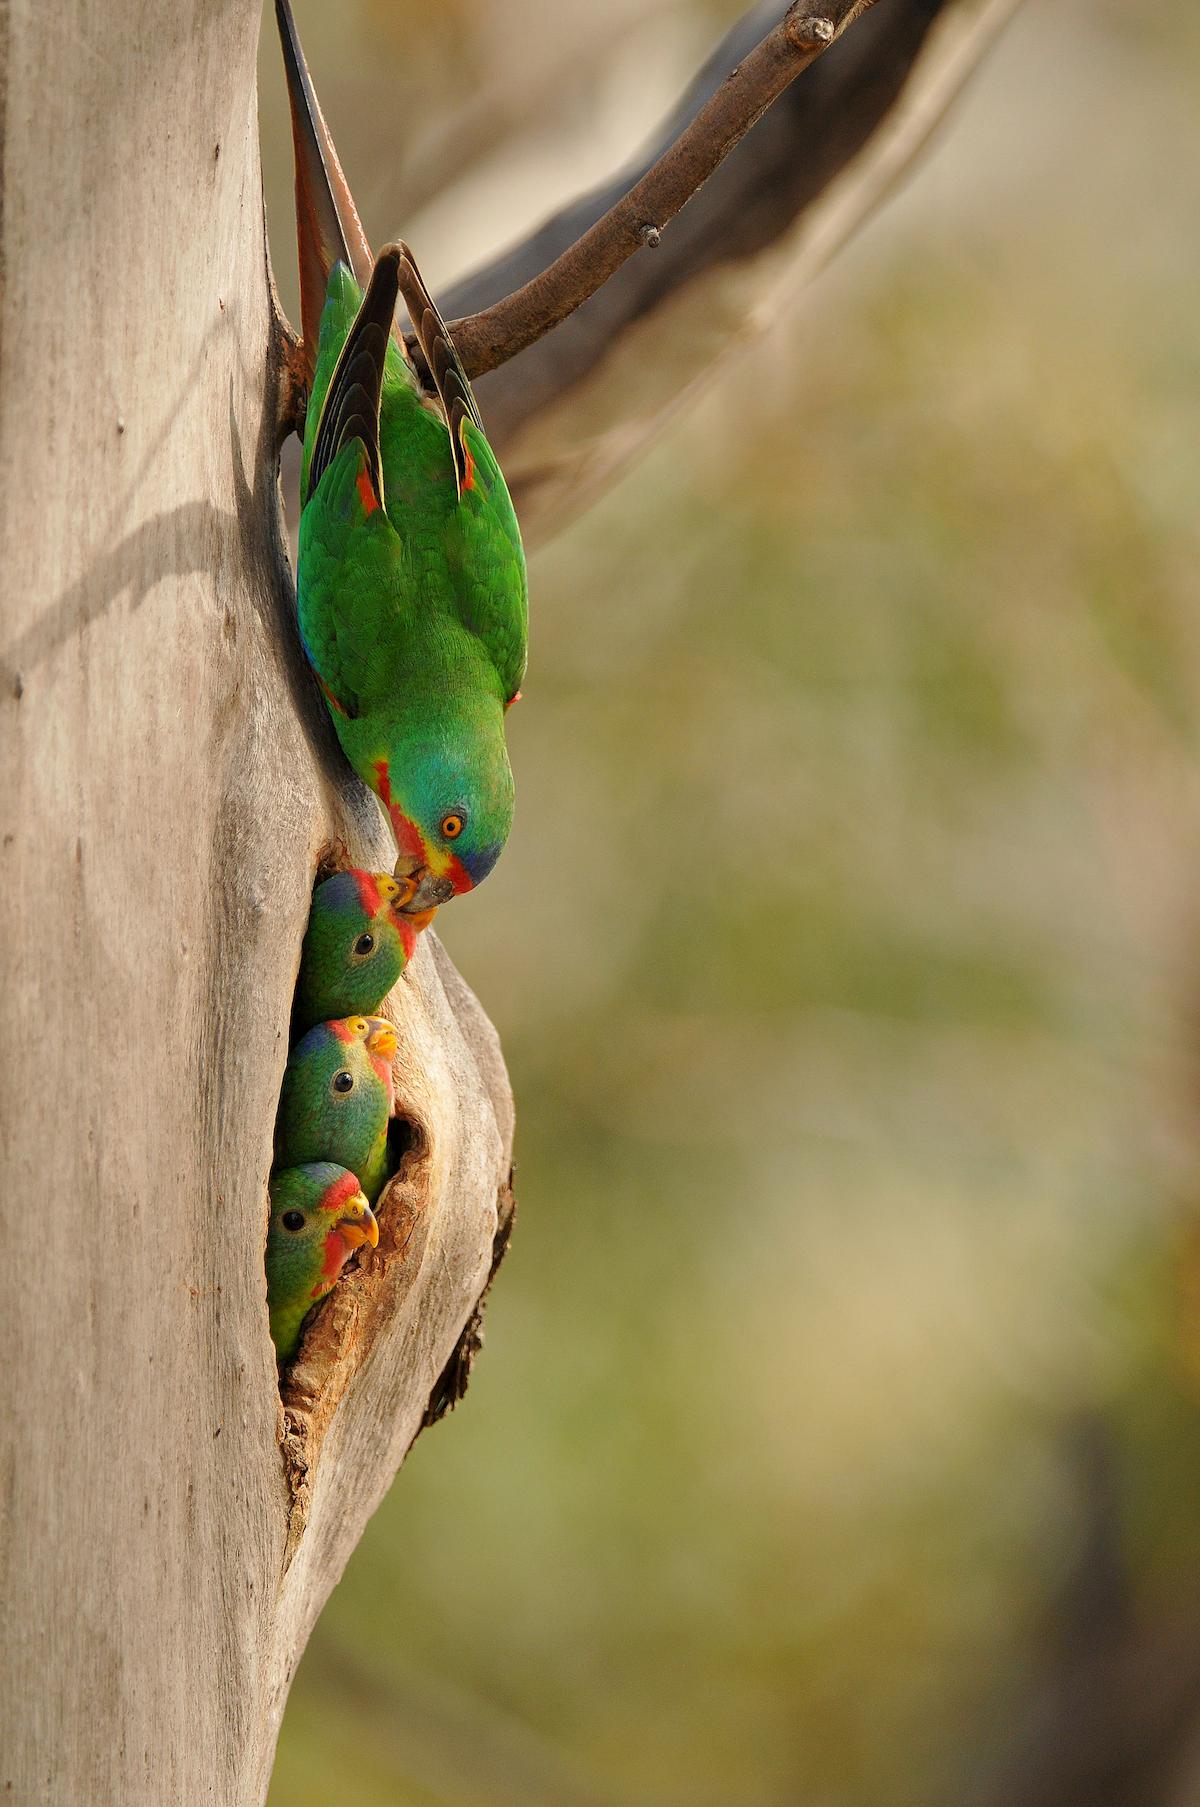 The Swift Parrot